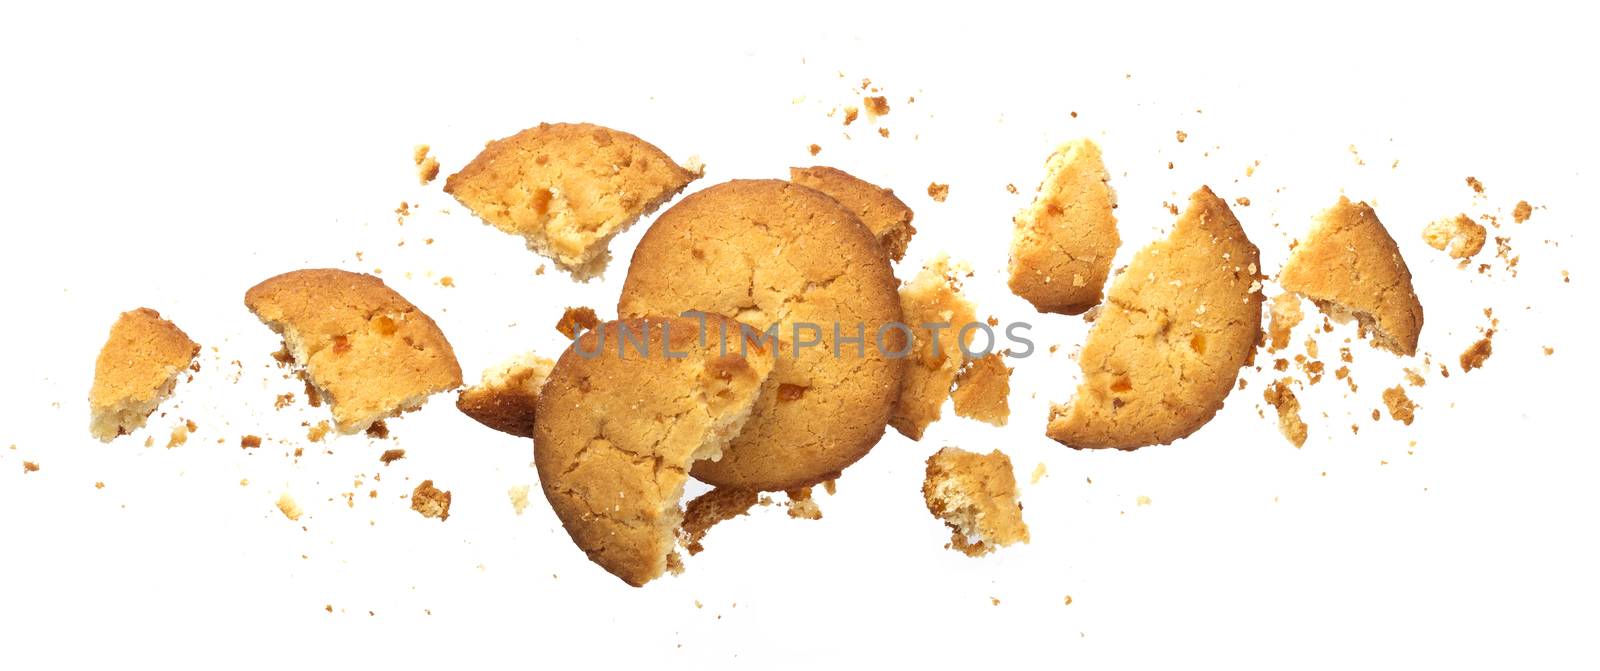 Broken oatmeal cookies isolated on white background by xamtiw